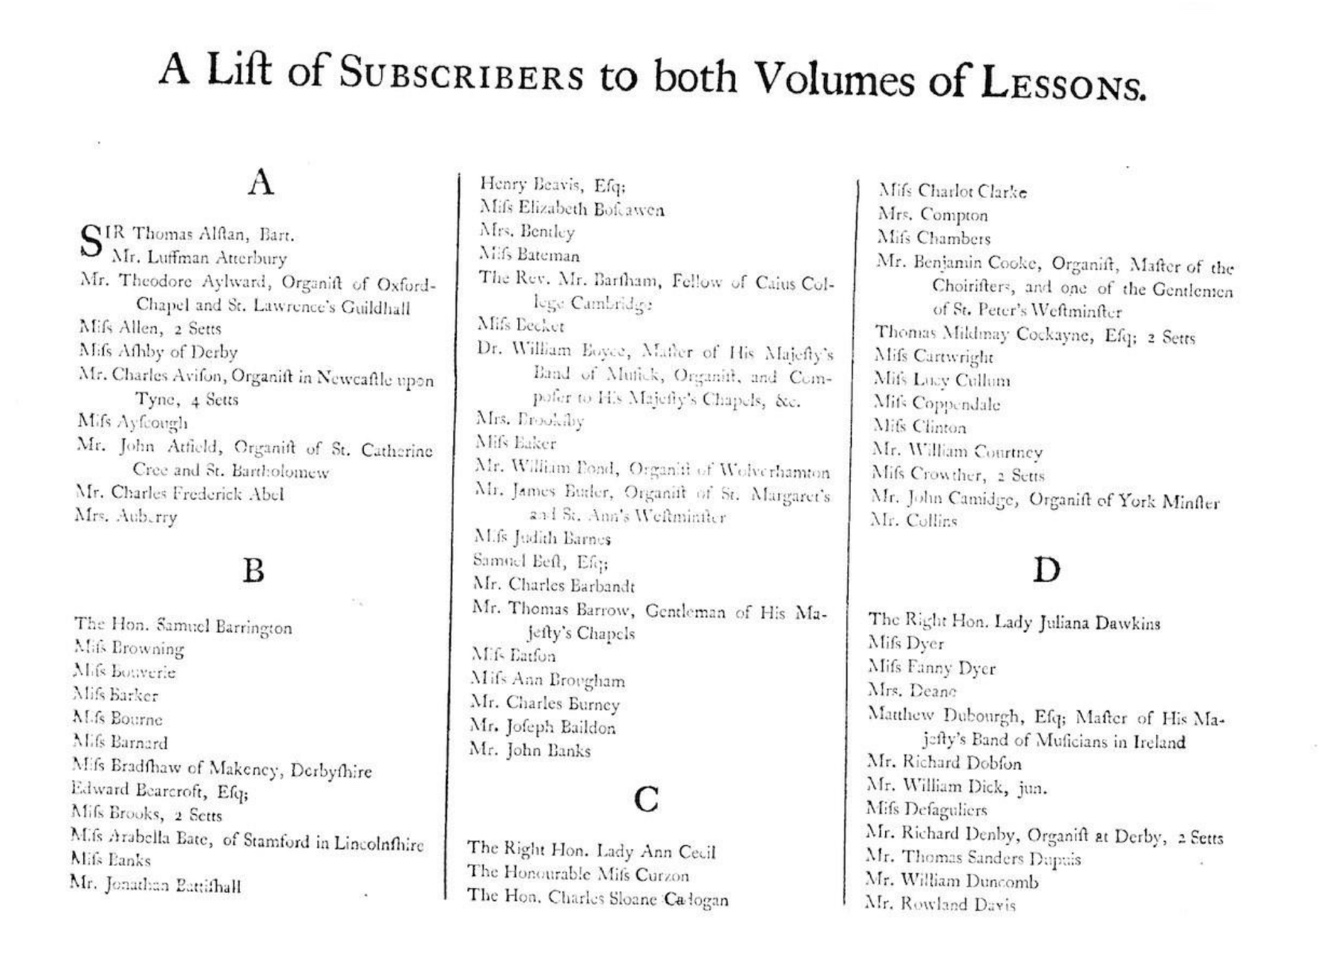 A subsequent page from the same manuscript, containing “A list of subscribers”, with many typeset names listed alphabetically